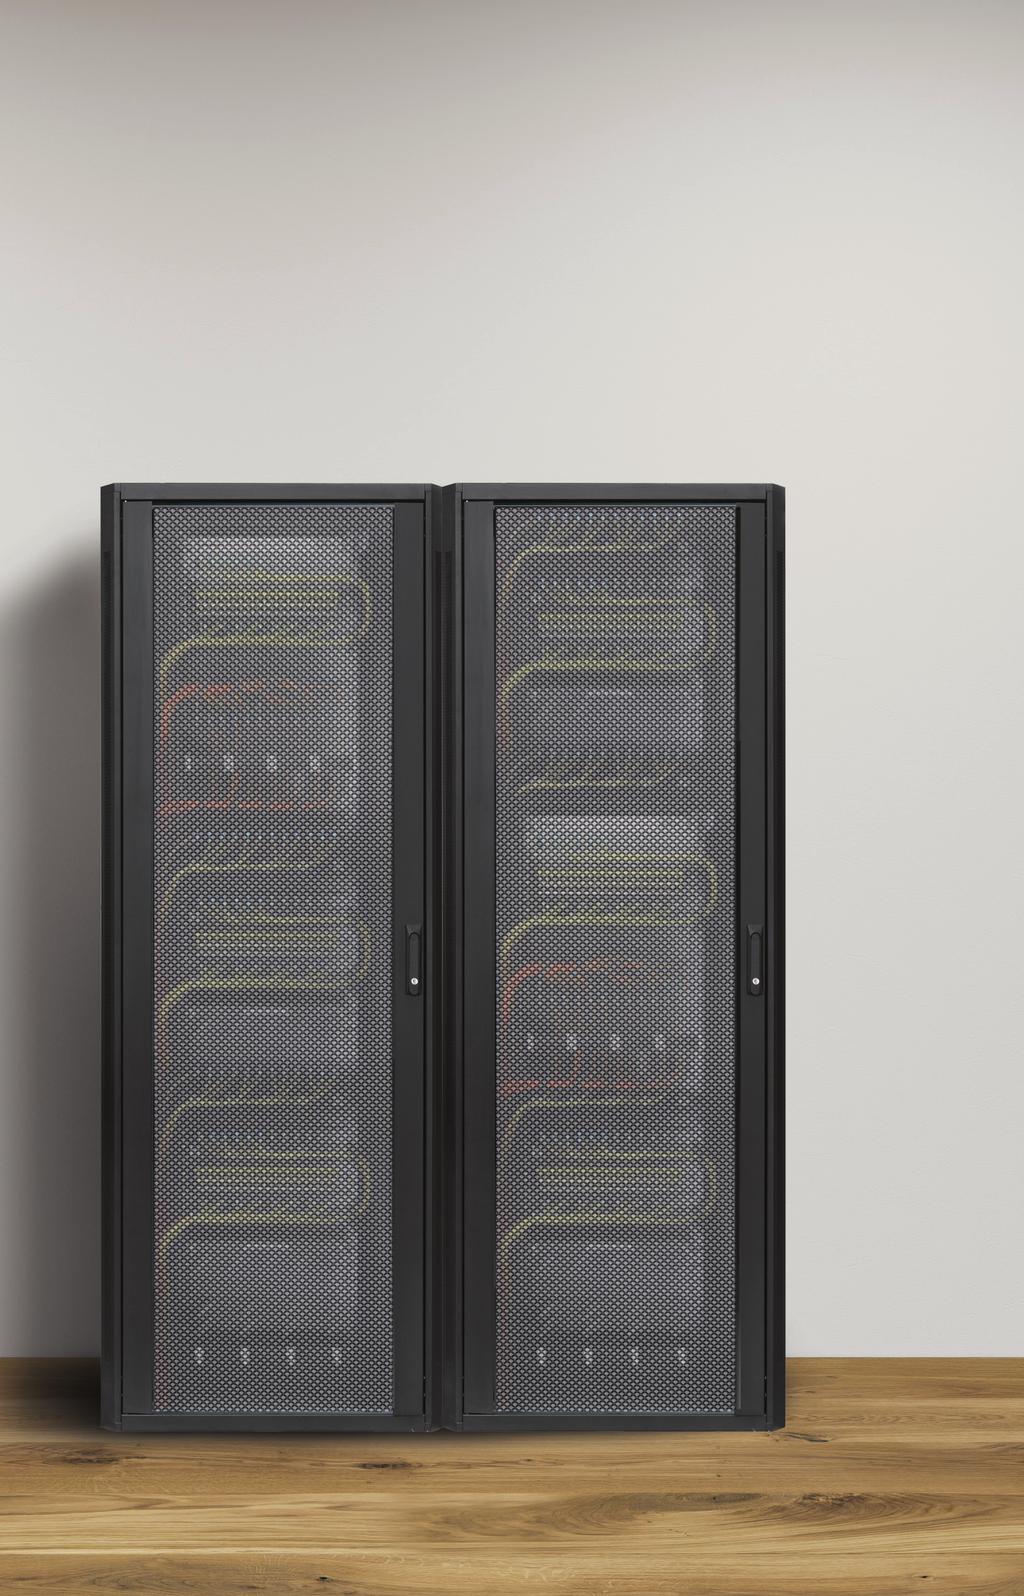 5 Rack cabinets by ENOLGASITECH enhance all habitats they are put in, besides being strongly characterized by innovation and technology.